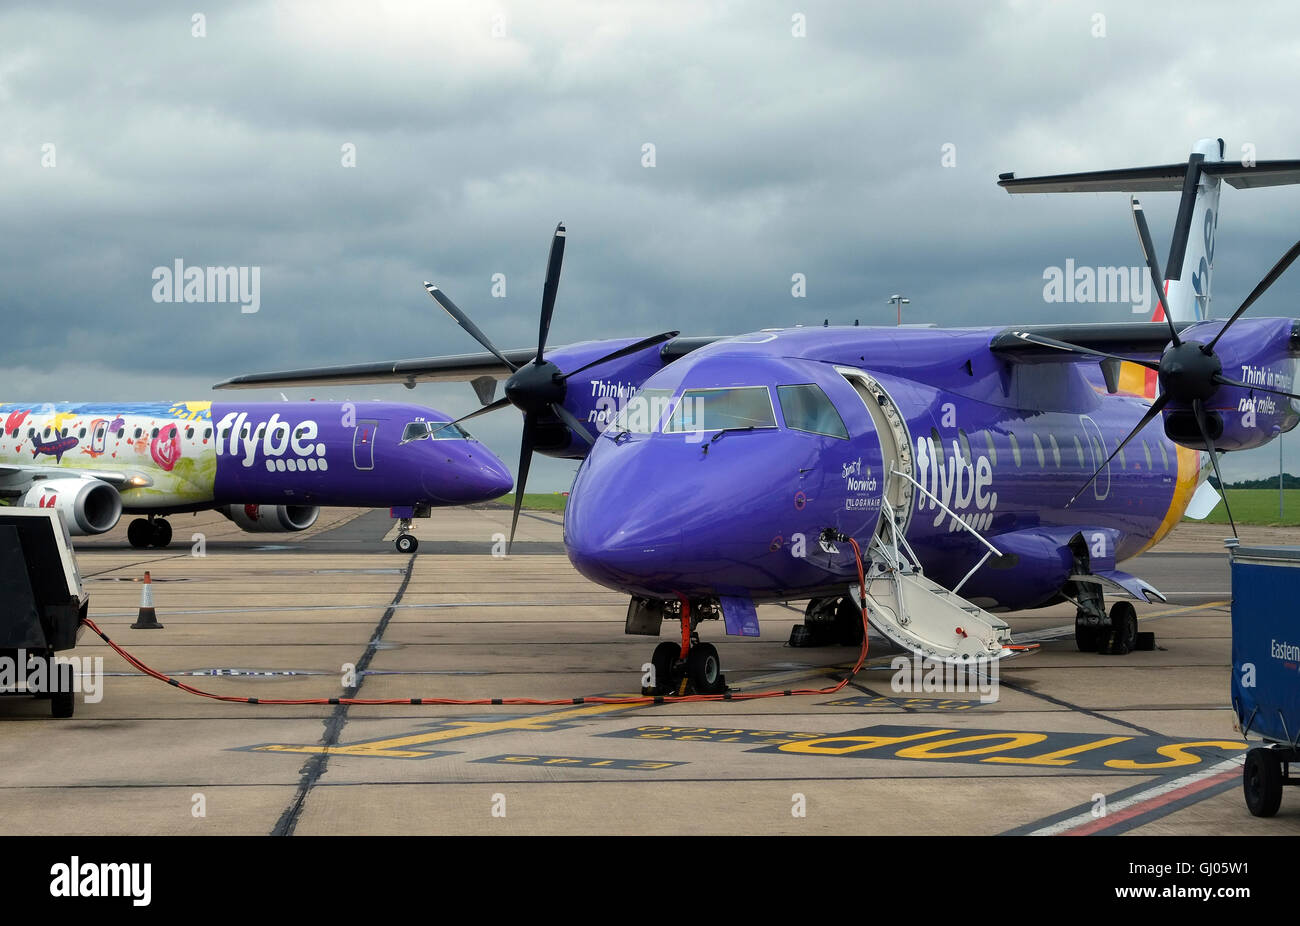 flybe aircraft at norwich airport, norfolk, england Stock Photo